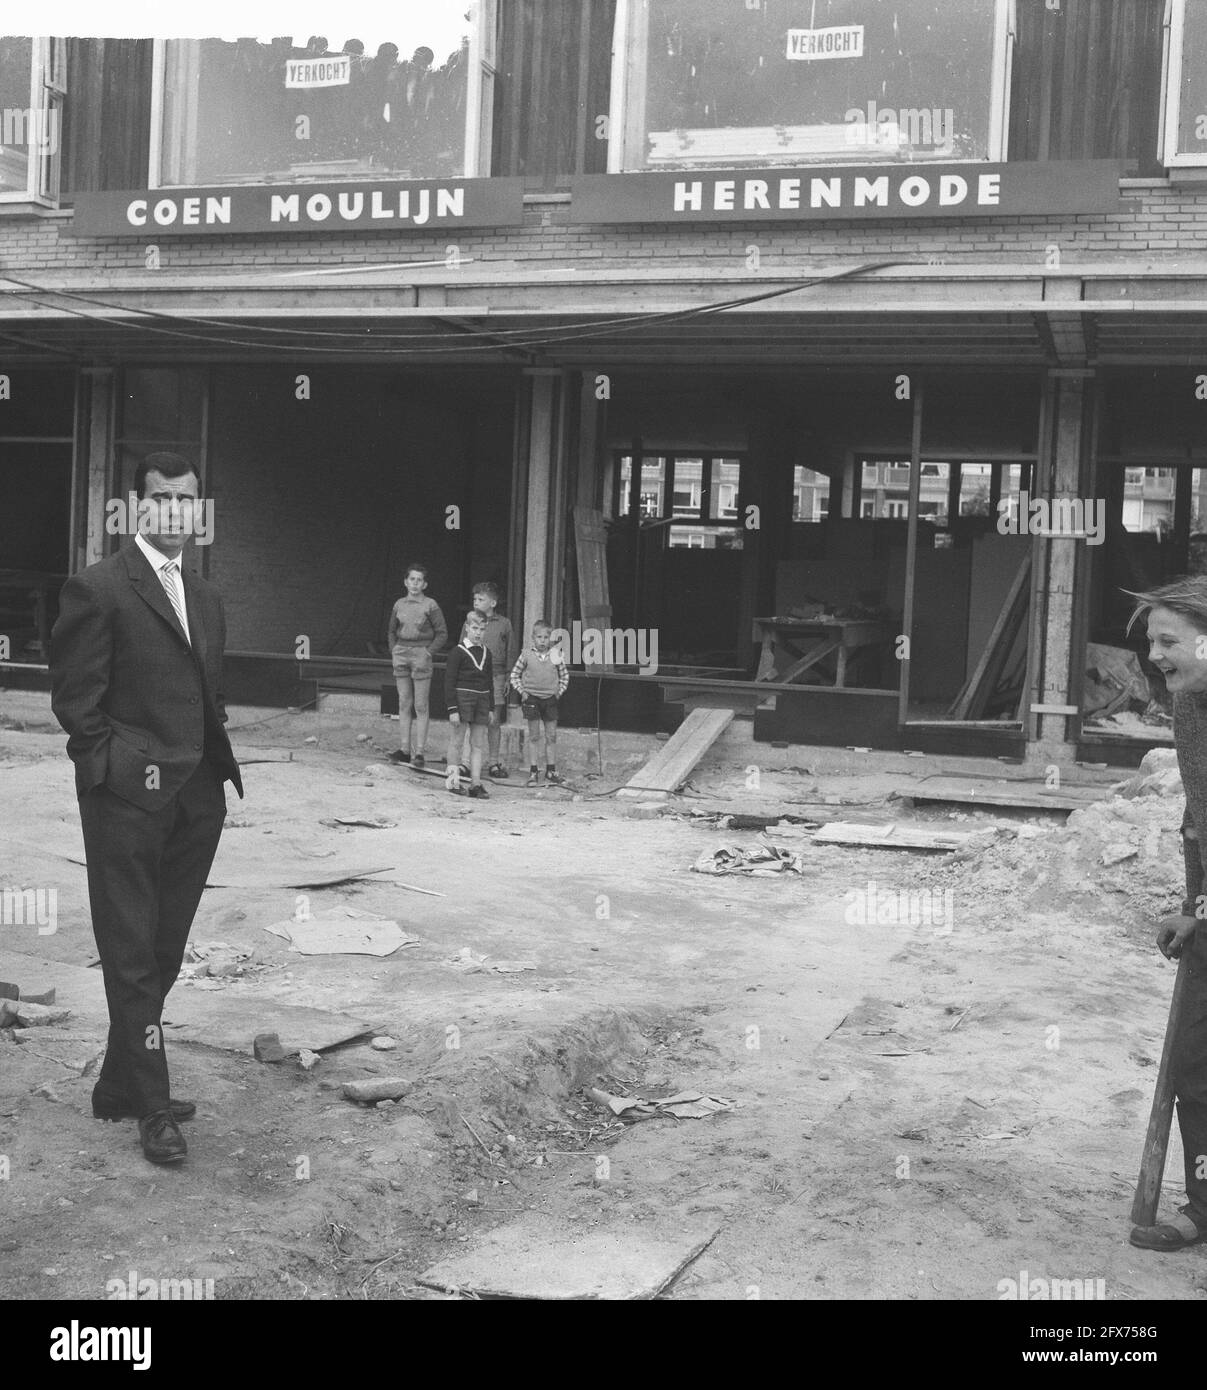 Coen Moulijn in front of his store under construction, June 1, 1961, construction, soccer, stores, The Netherlands, 20th century press agency photo, news to remember, documentary, historic photography 1945-1990, visual stories, human history of the Twentieth Century, capturing moments in time Stock Photo